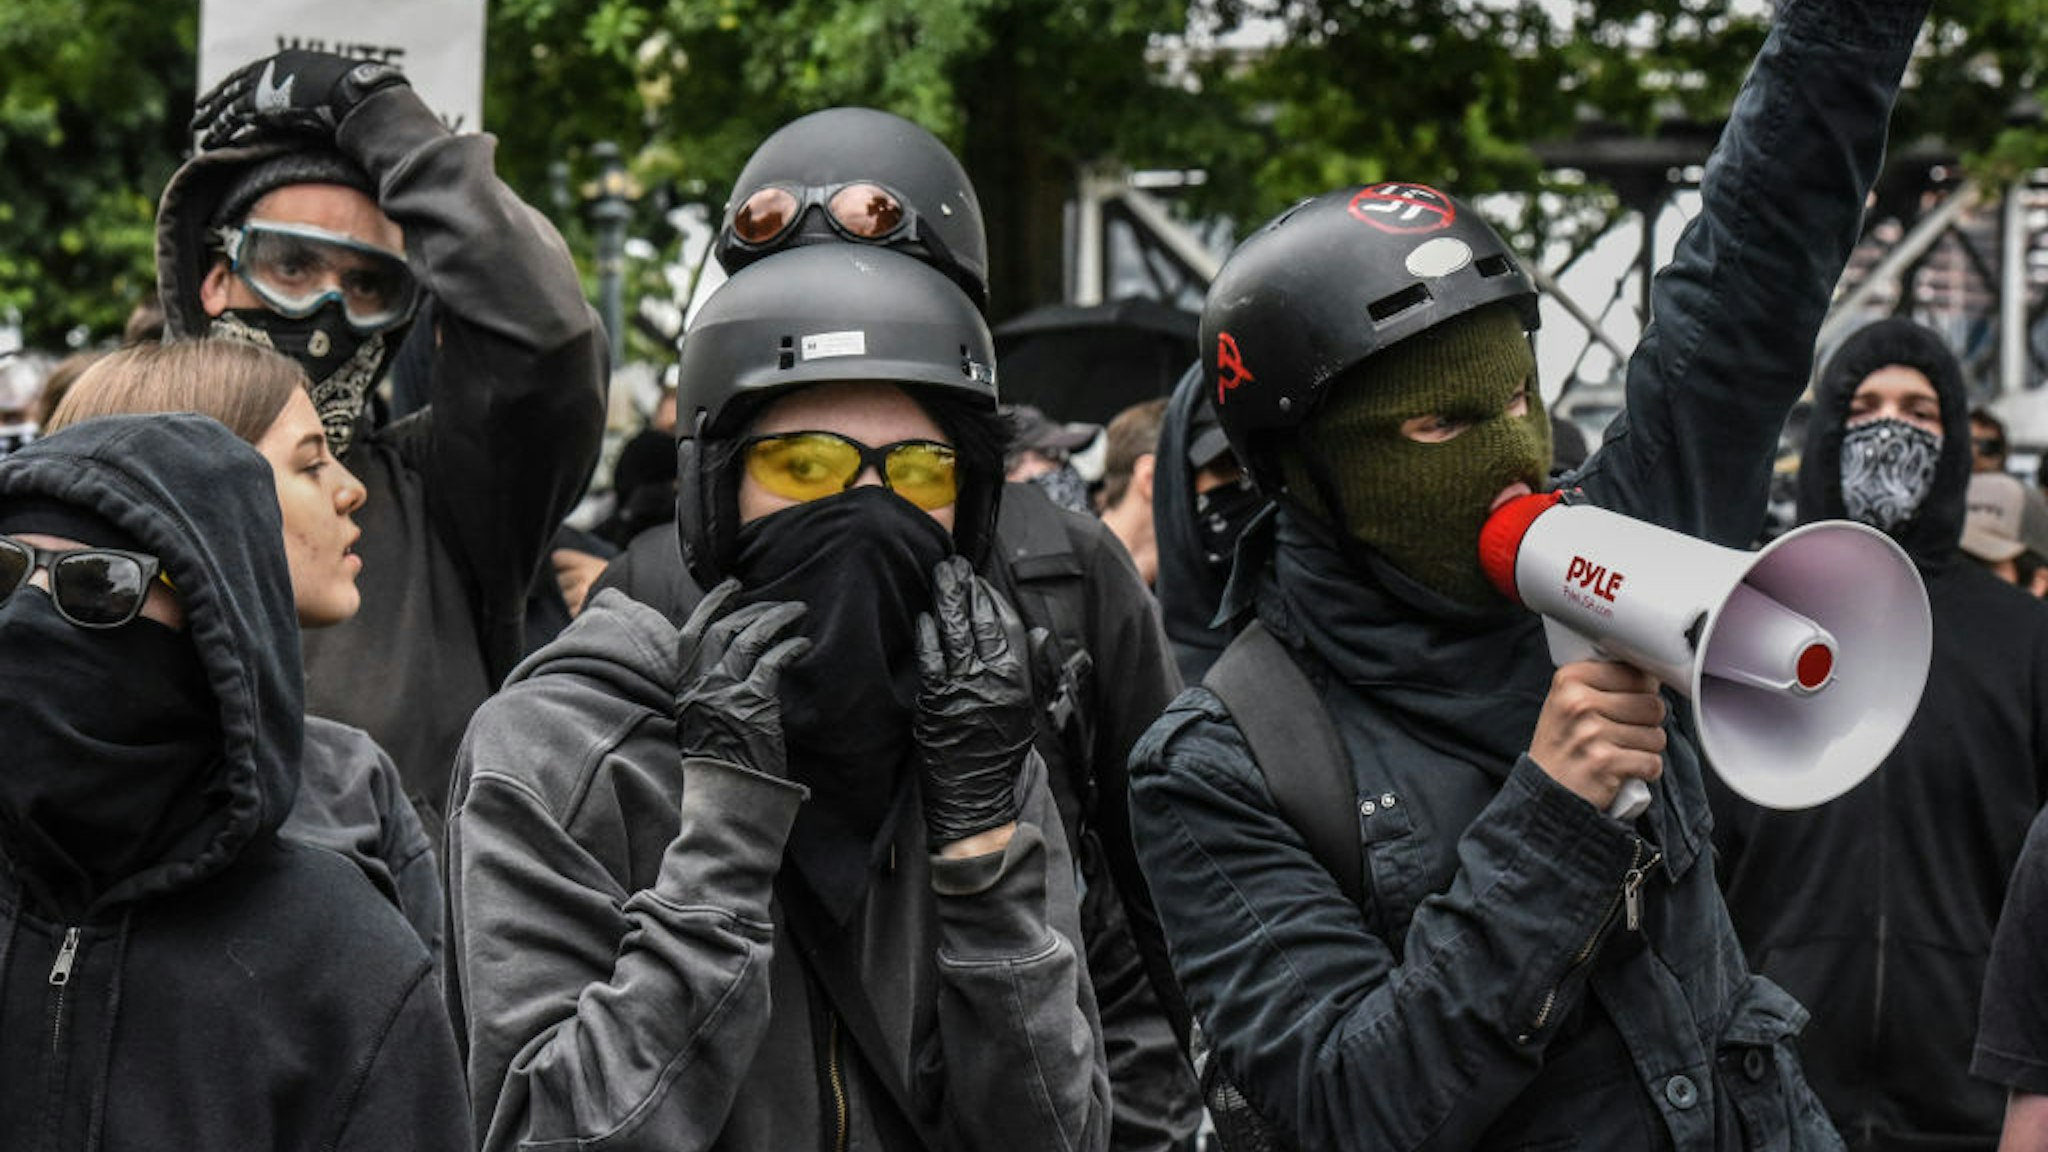 PORTLAND, OR - AUGUST 17: Counter-protesters wear black clothes during an Antifa gathering during an alt-right rally on August 17, 2019 in Portland, Oregon. Anti-fascism demonstrators gathered to counter-protest a rally held by far-right, extremist groups. (Photo by Stephanie Keith/Getty Images)